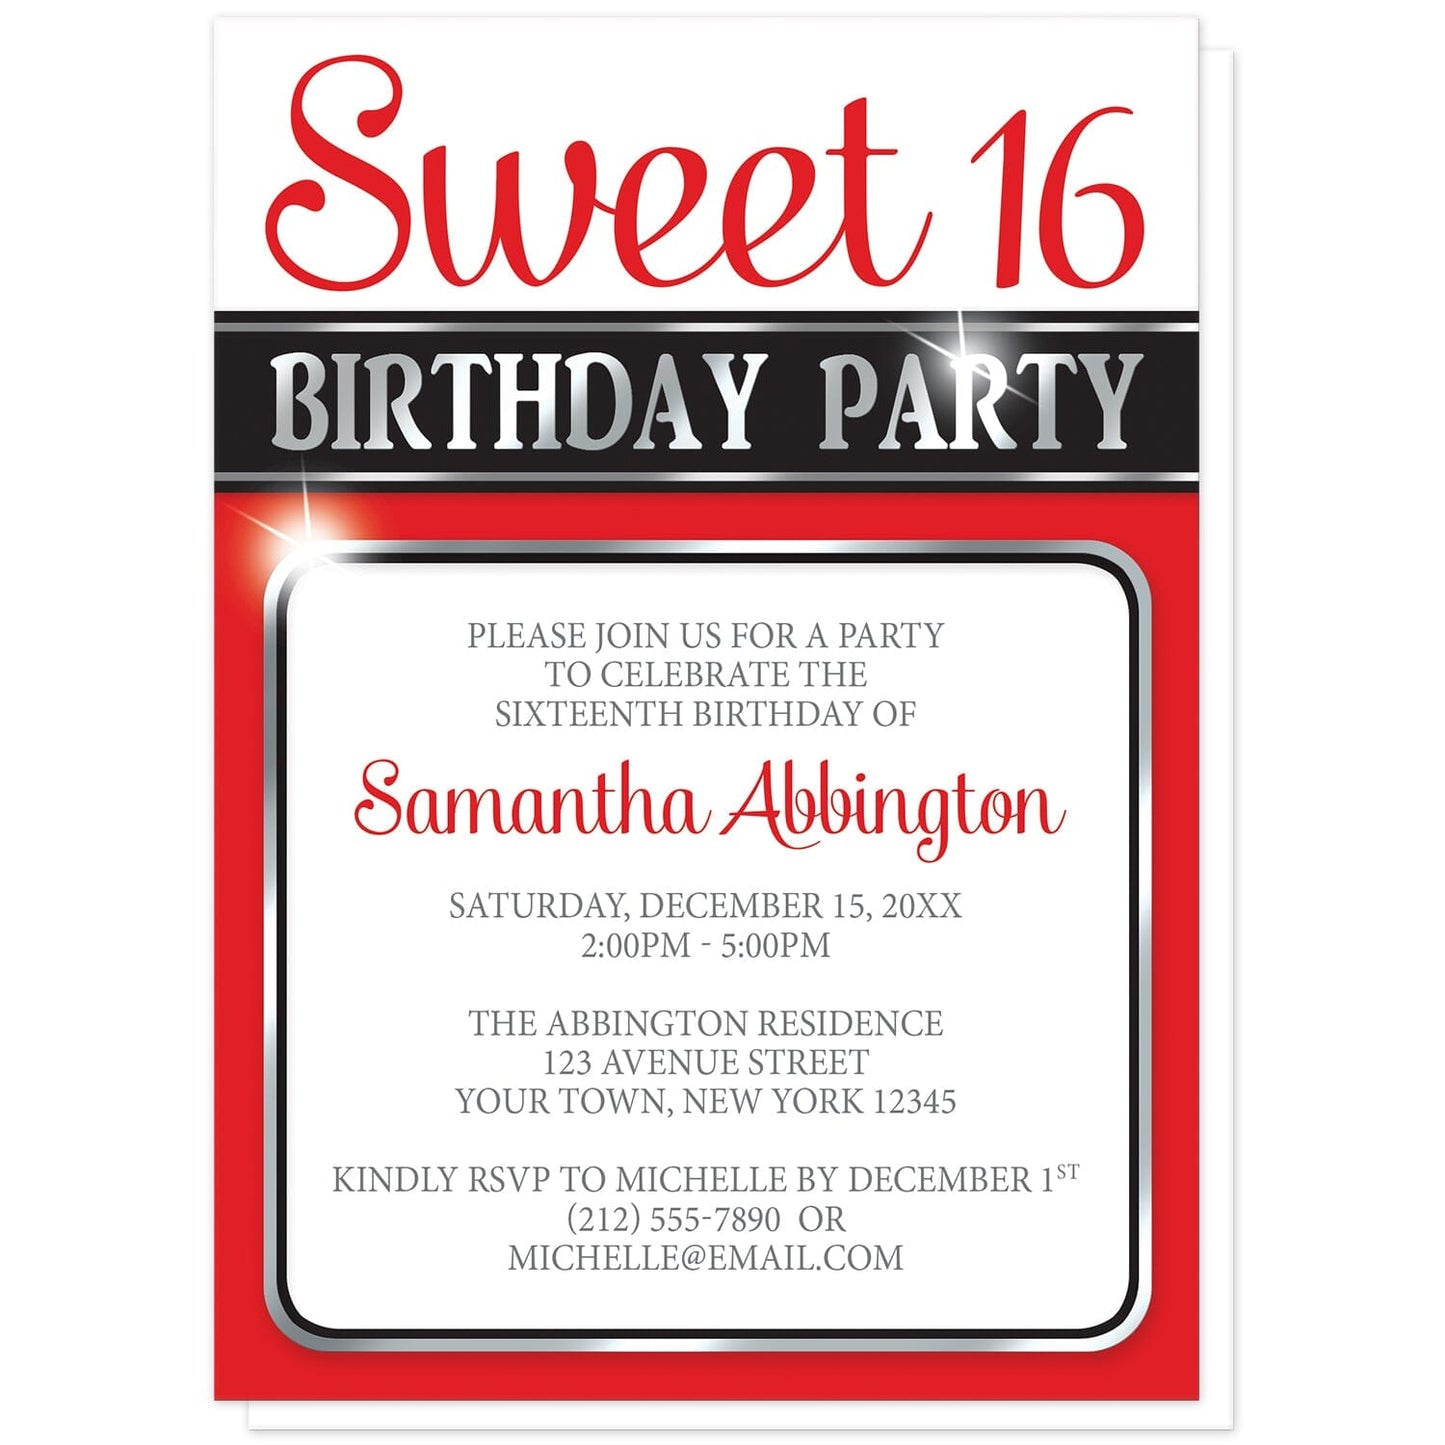 Classy Red and Silver Sweet 16 Birthday Party Invitations at Artistically Invited. Modern and classy red and silver sweet 16 invitations in a red, black and silver-colored design. These sweet sixteen invitations have the occasion title at the top in red and a silver-colored design and your personalized party details are custom printed in gray and red inside a white frame with rounded corners. This frame design is outlined in black and a silver-color over a red background. 